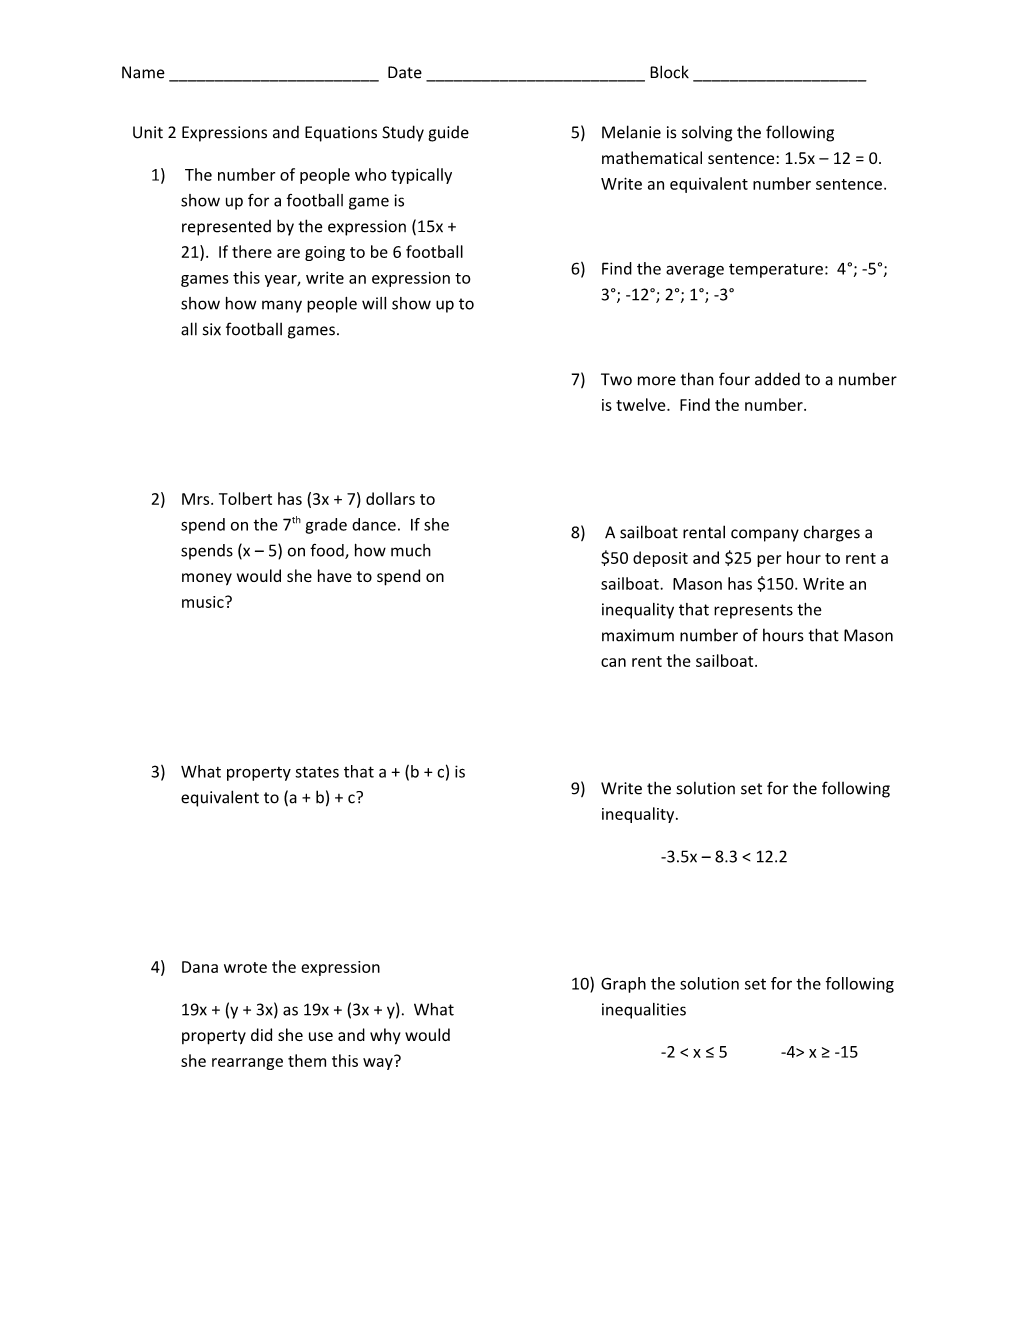 Unit 2 Expressions and Equations Study Guide